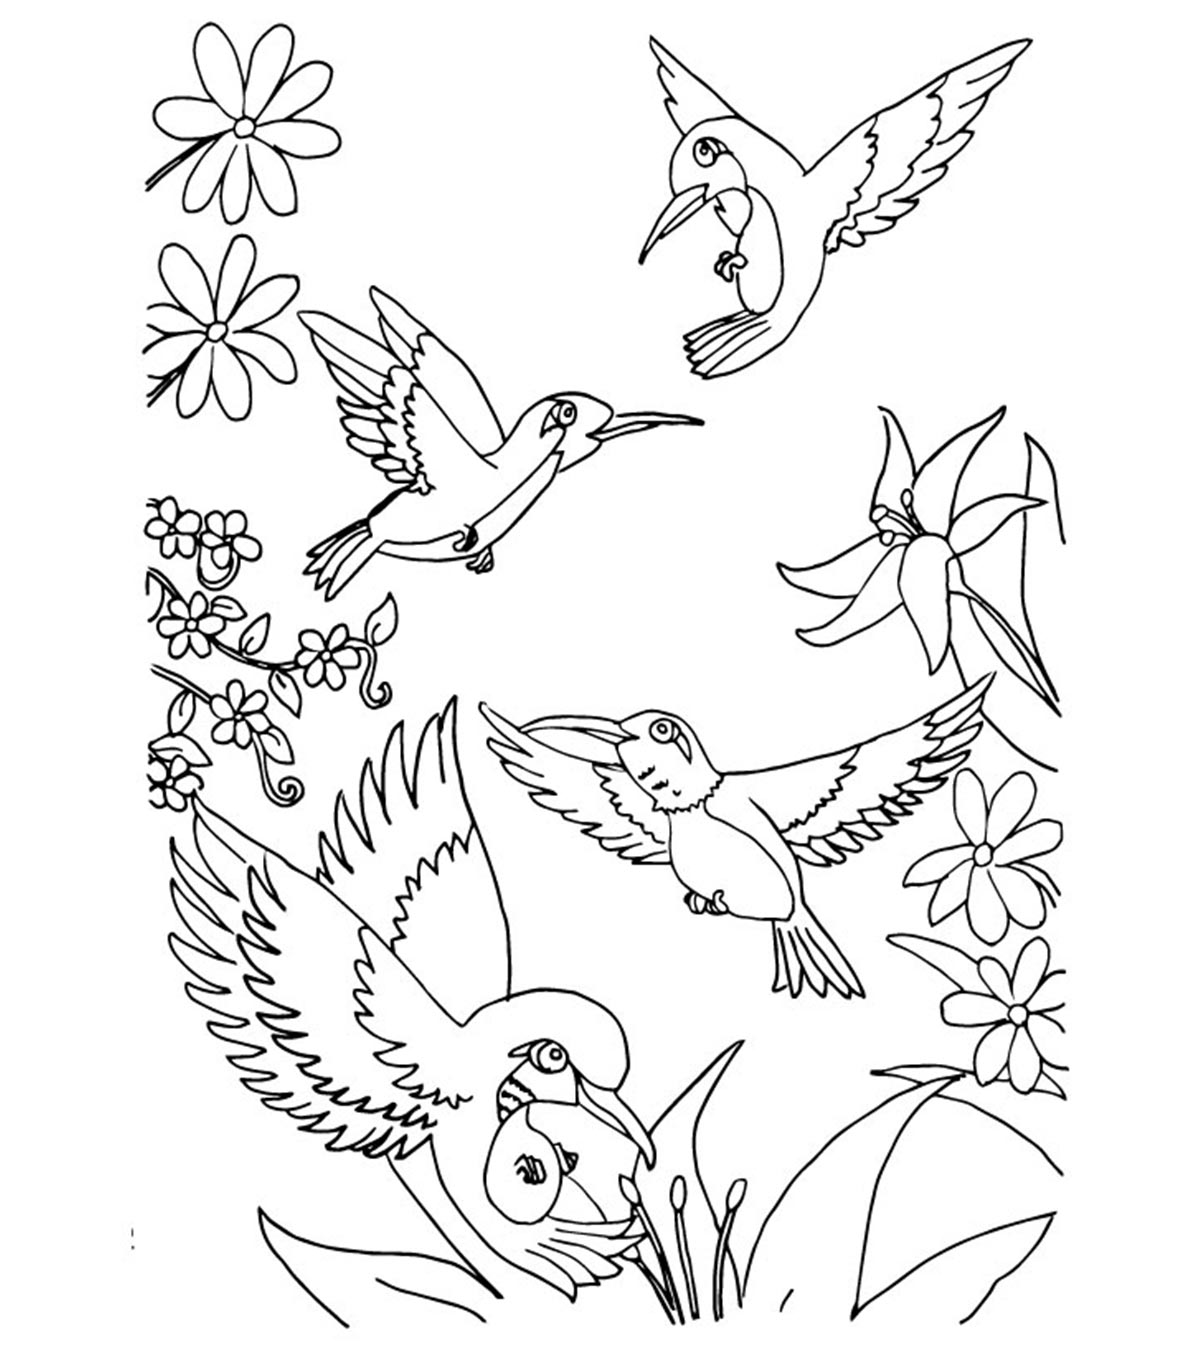 Top 10 Humming Bird Coloring Pages For Your Toddler